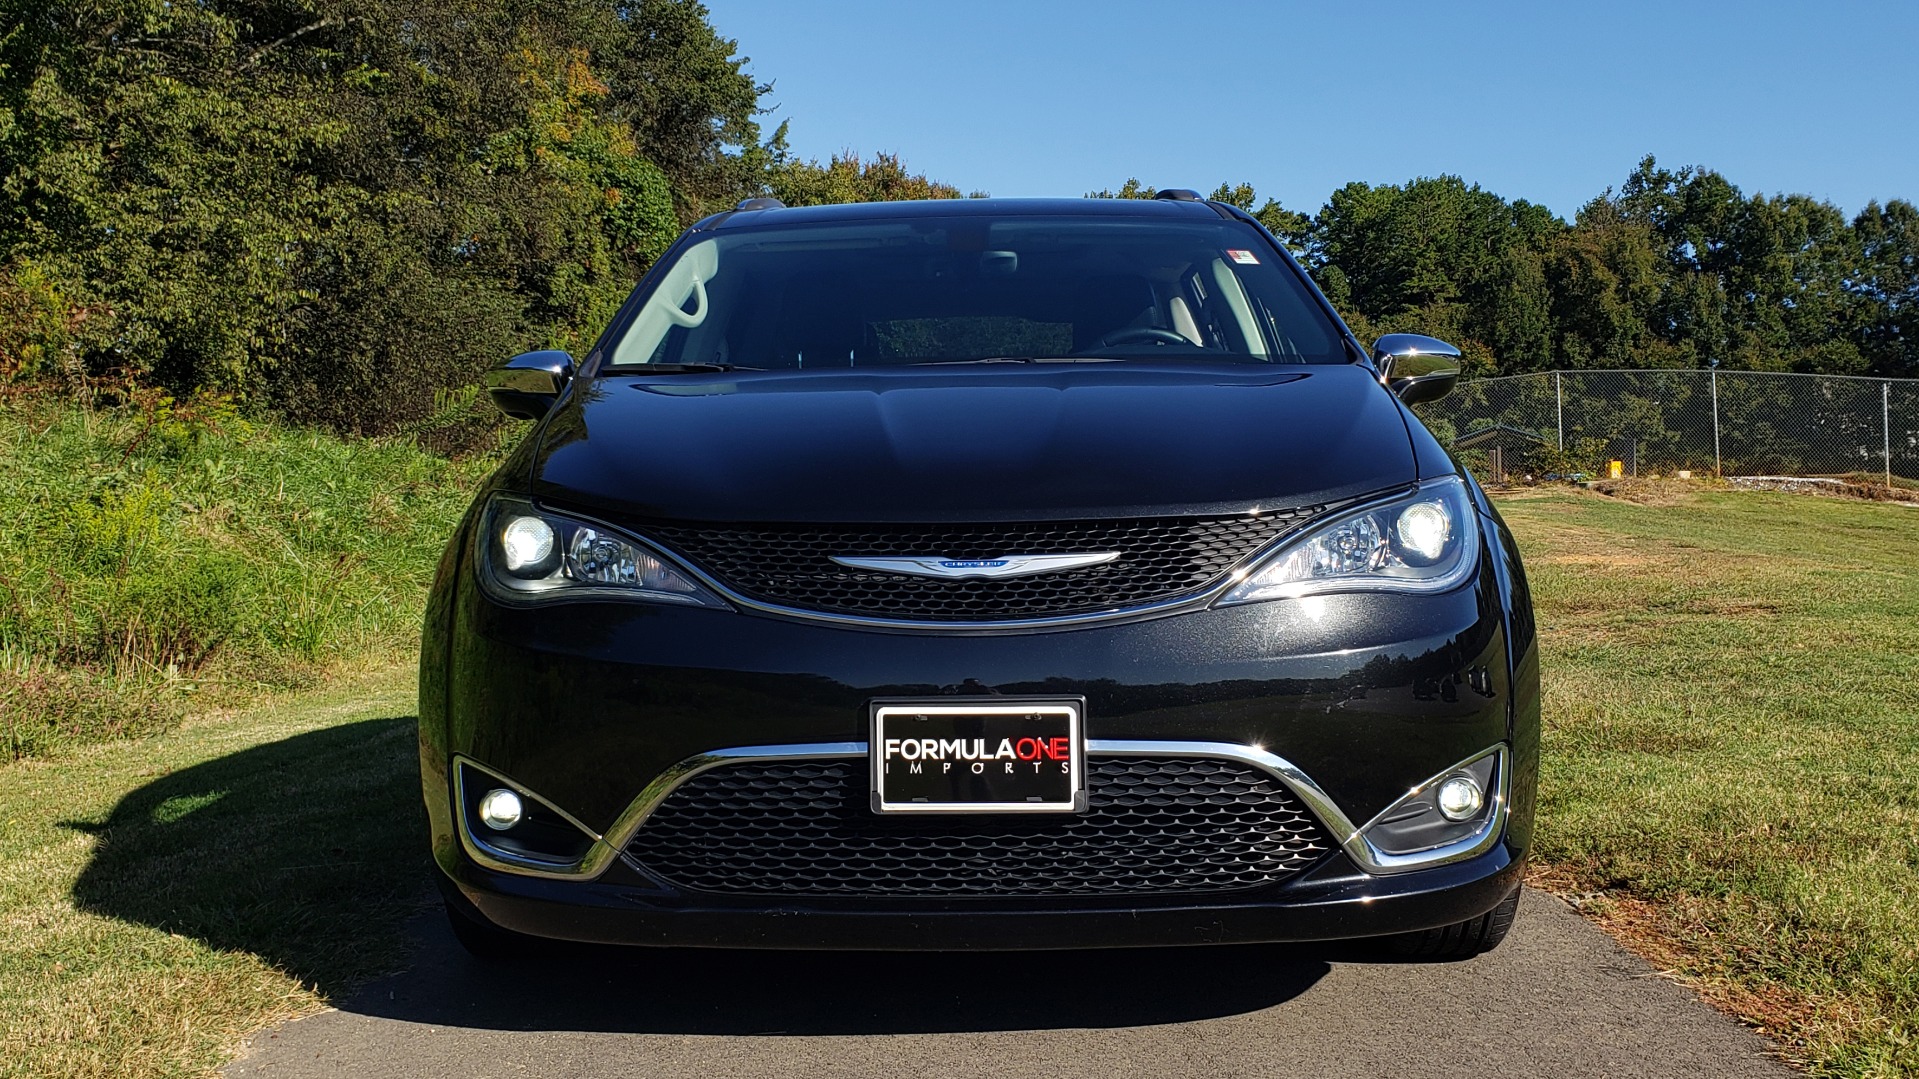 Used 2018 Chrysler PACIFICA LIMITED / 3.6L V6 / NAV / PANO-ROOF / 3-ROWS / REARVIEW for sale Sold at Formula Imports in Charlotte NC 28227 12